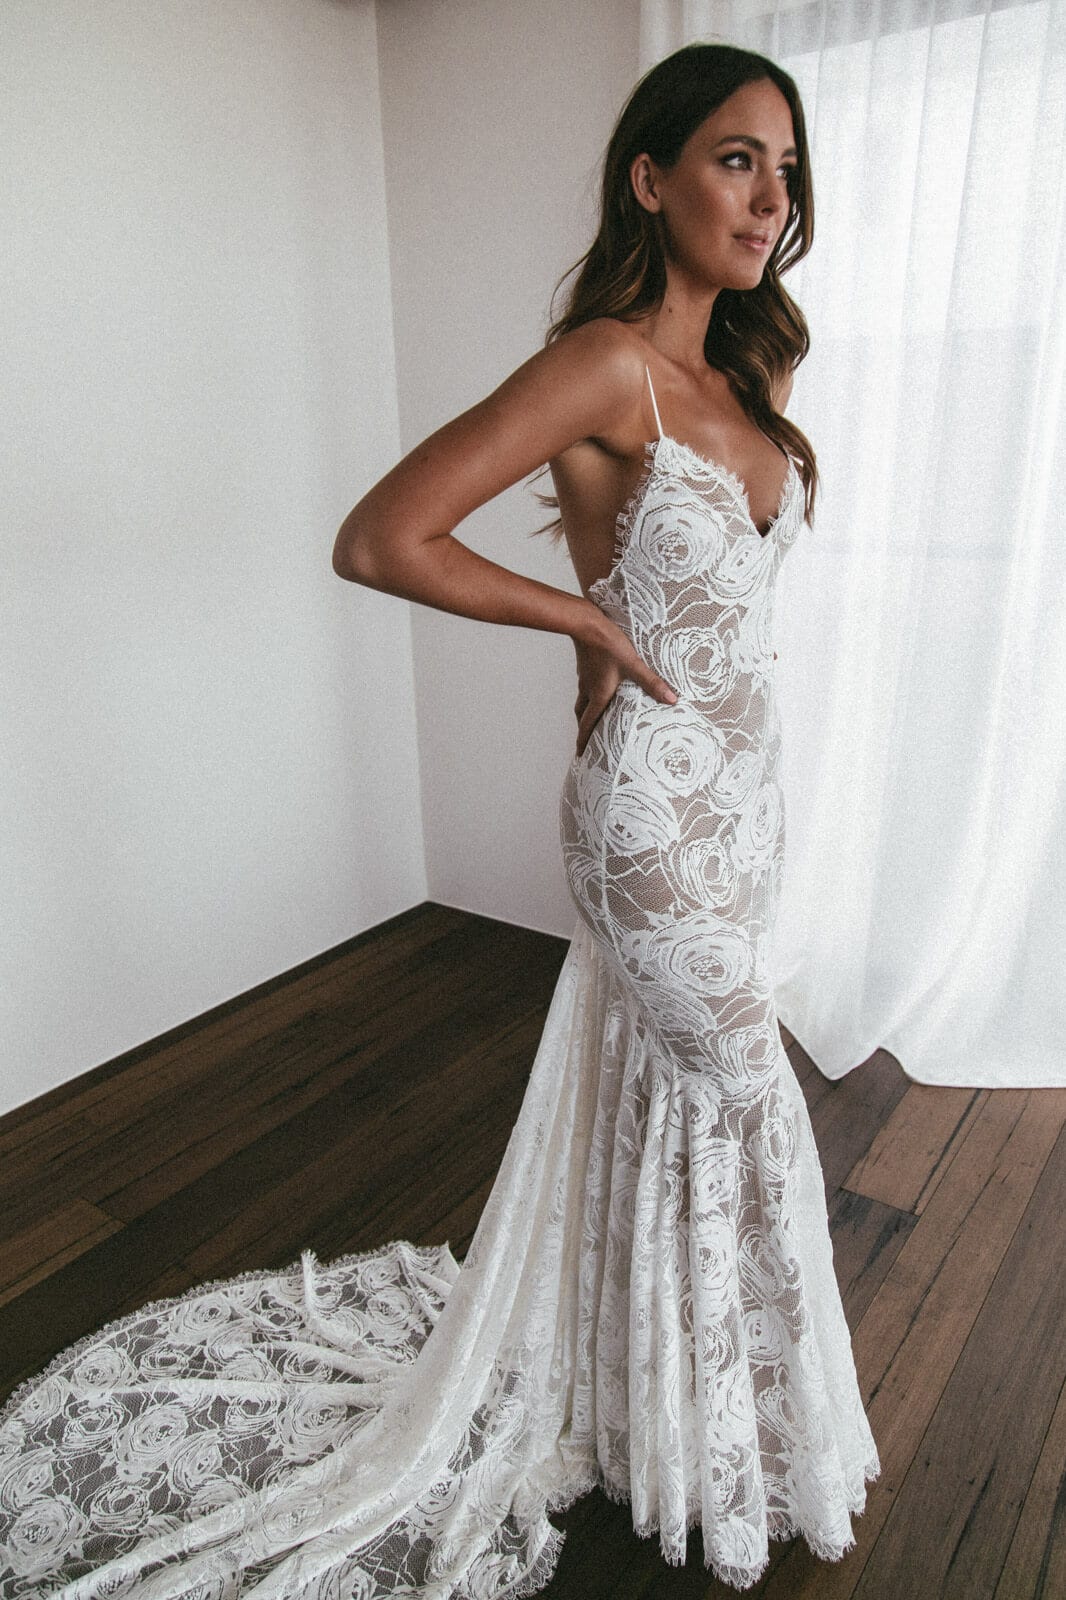 Clo Gown, Lace Wedding Dress